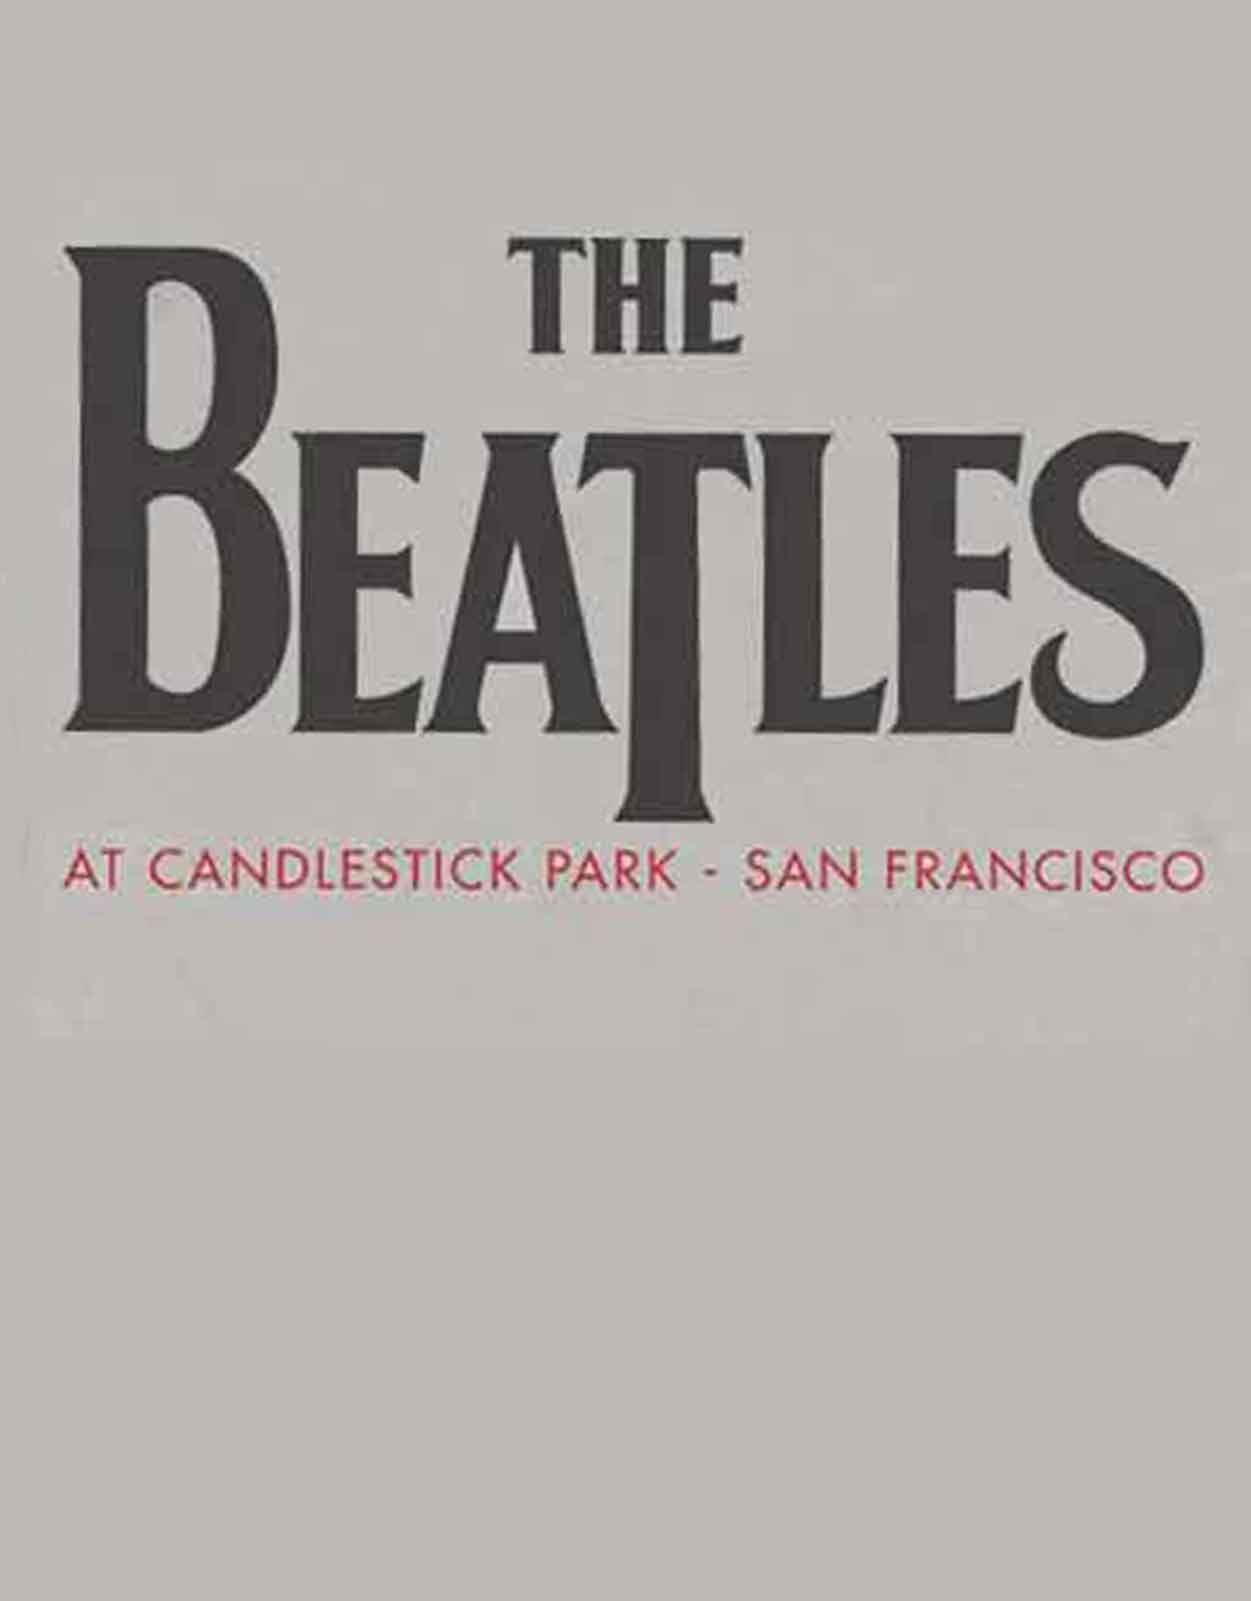 The Beatles Candlestick Park 1966 Skinny Fit T Shirt